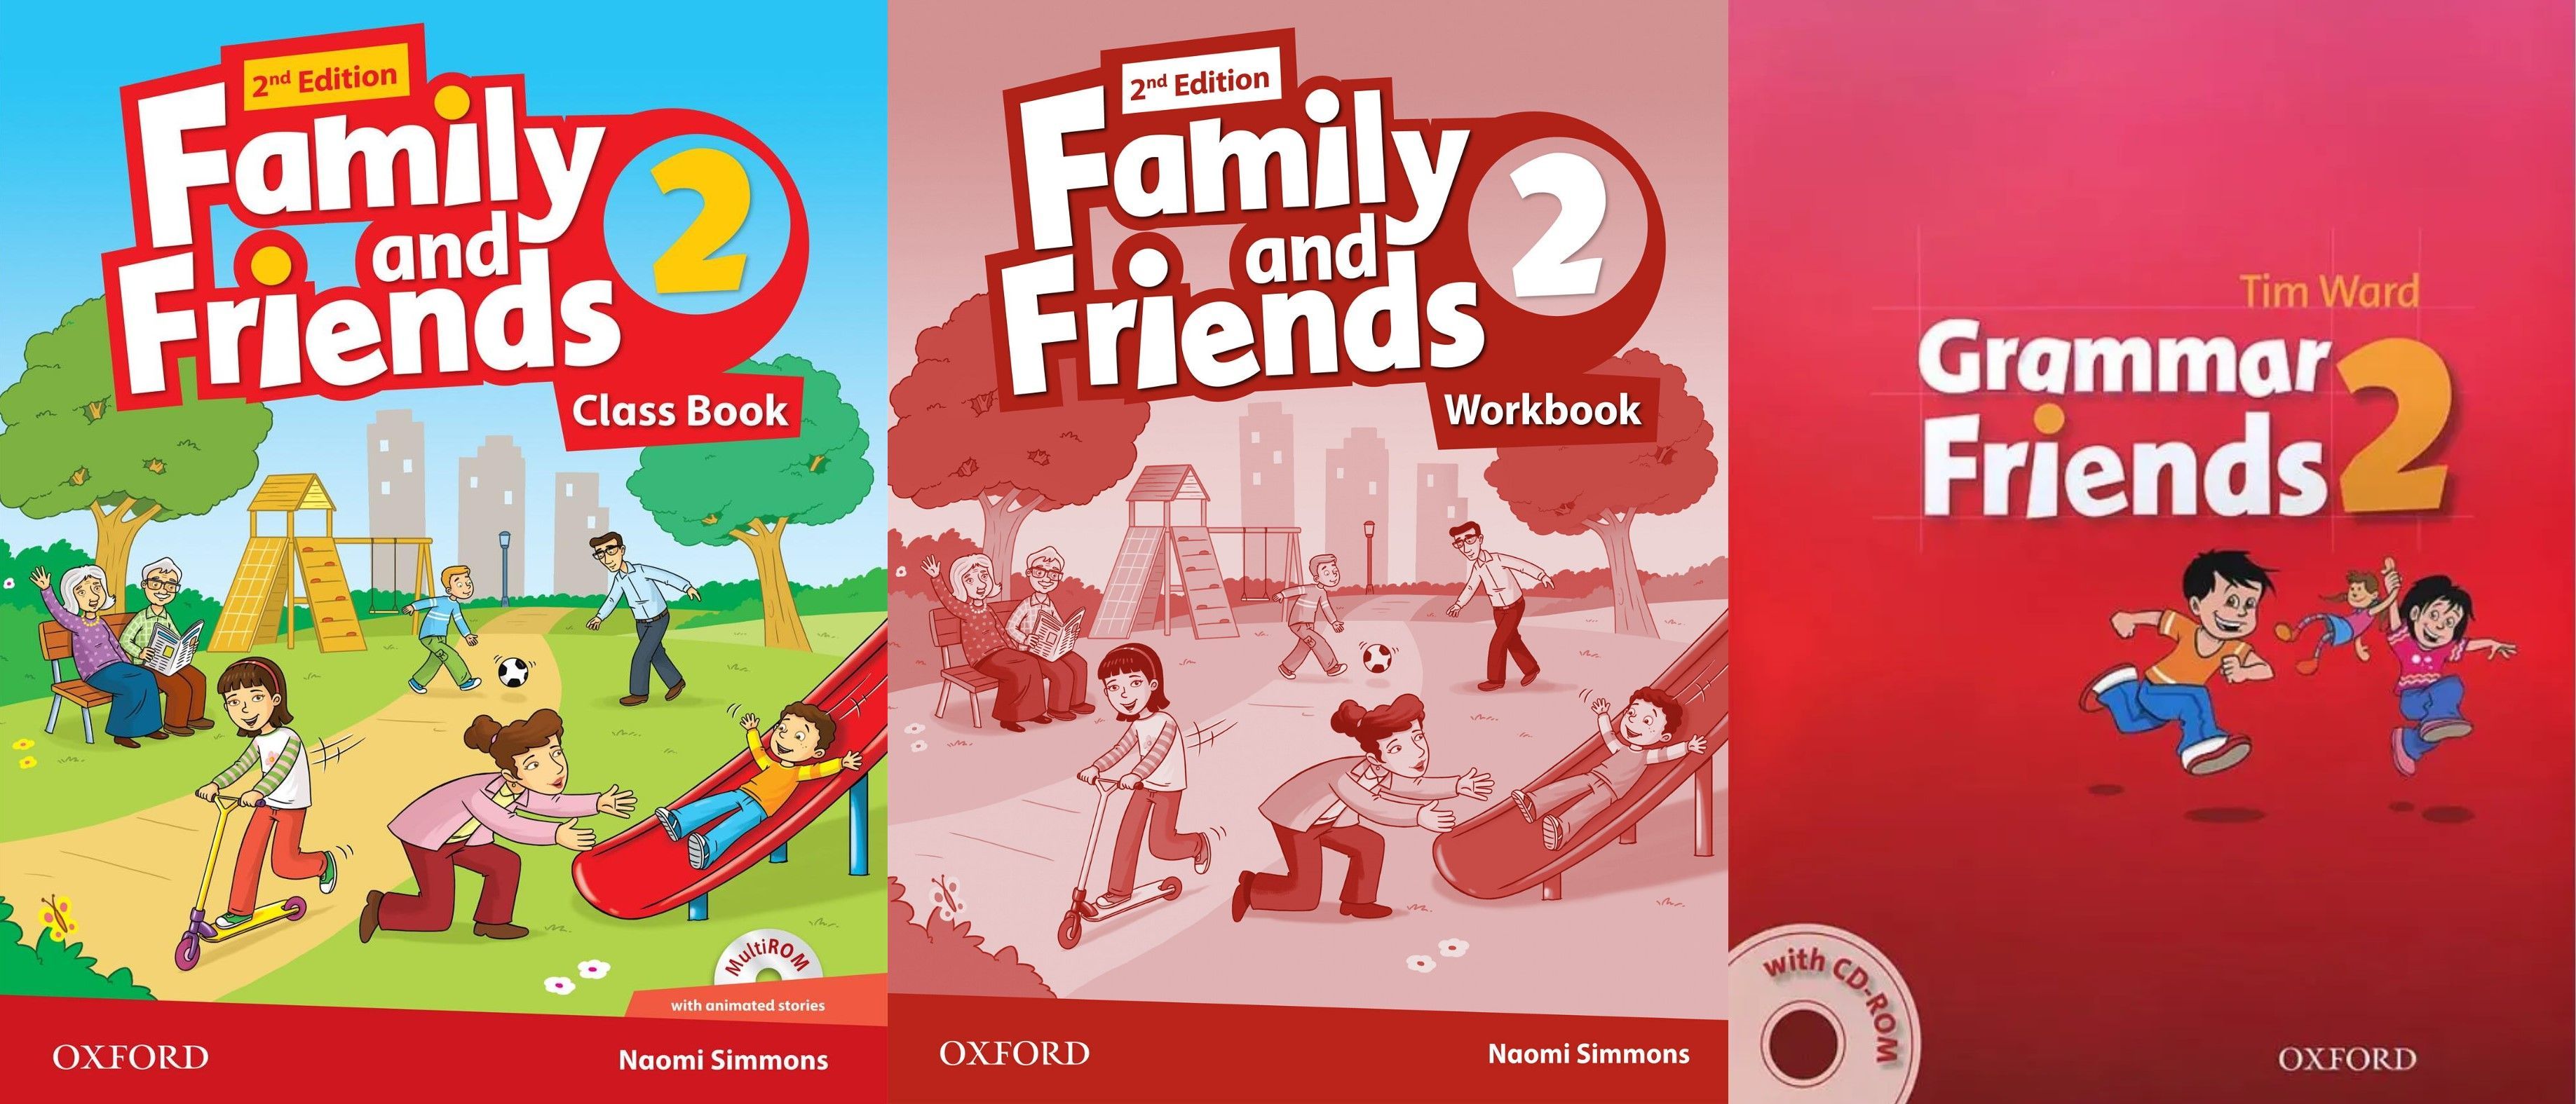 English workbook 2 класс. Английский язык Family and friends class book 2. Книга Family and friends 2. \Фэмили энд френдс 2 издание. Английский Family and friends 2 class book.